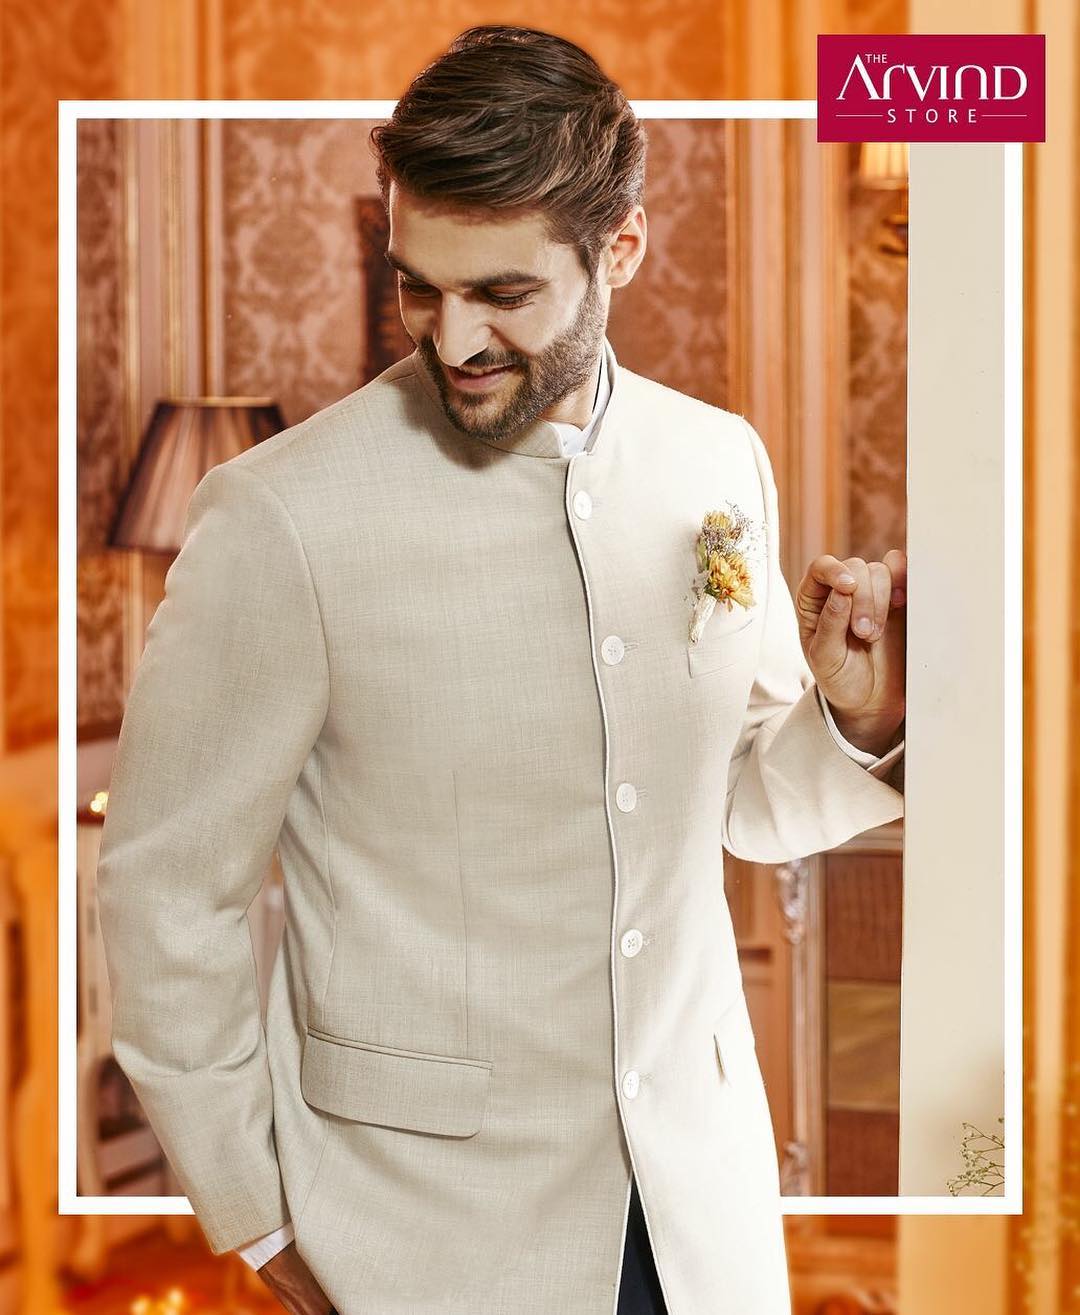 The traditional essence of this bandhgala makes it a winner for the wedding outfit! Come, get the look that helps you steal the show at the next wedding you attend. Book your appointment today - Link in Bio

#designerwear #menswear #celebrationwear #weddingwear #suits #royal #weddingsuits #bestdressed #menswear #handcrafted #accessories #style #mensfashion #menwithstyle